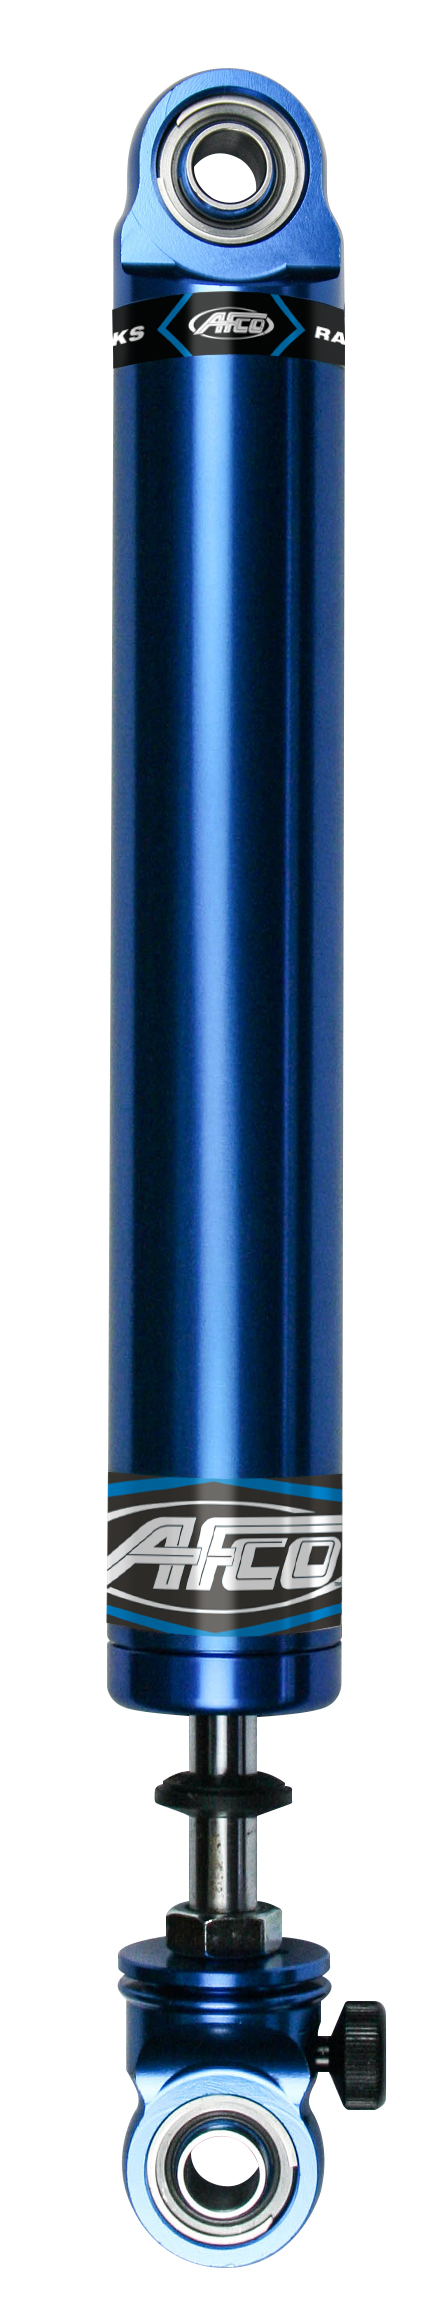 Aluminum Shock Twin Tube 16 Series Small Body 7 Inch Comp 3/Reb 3-6 Smooth